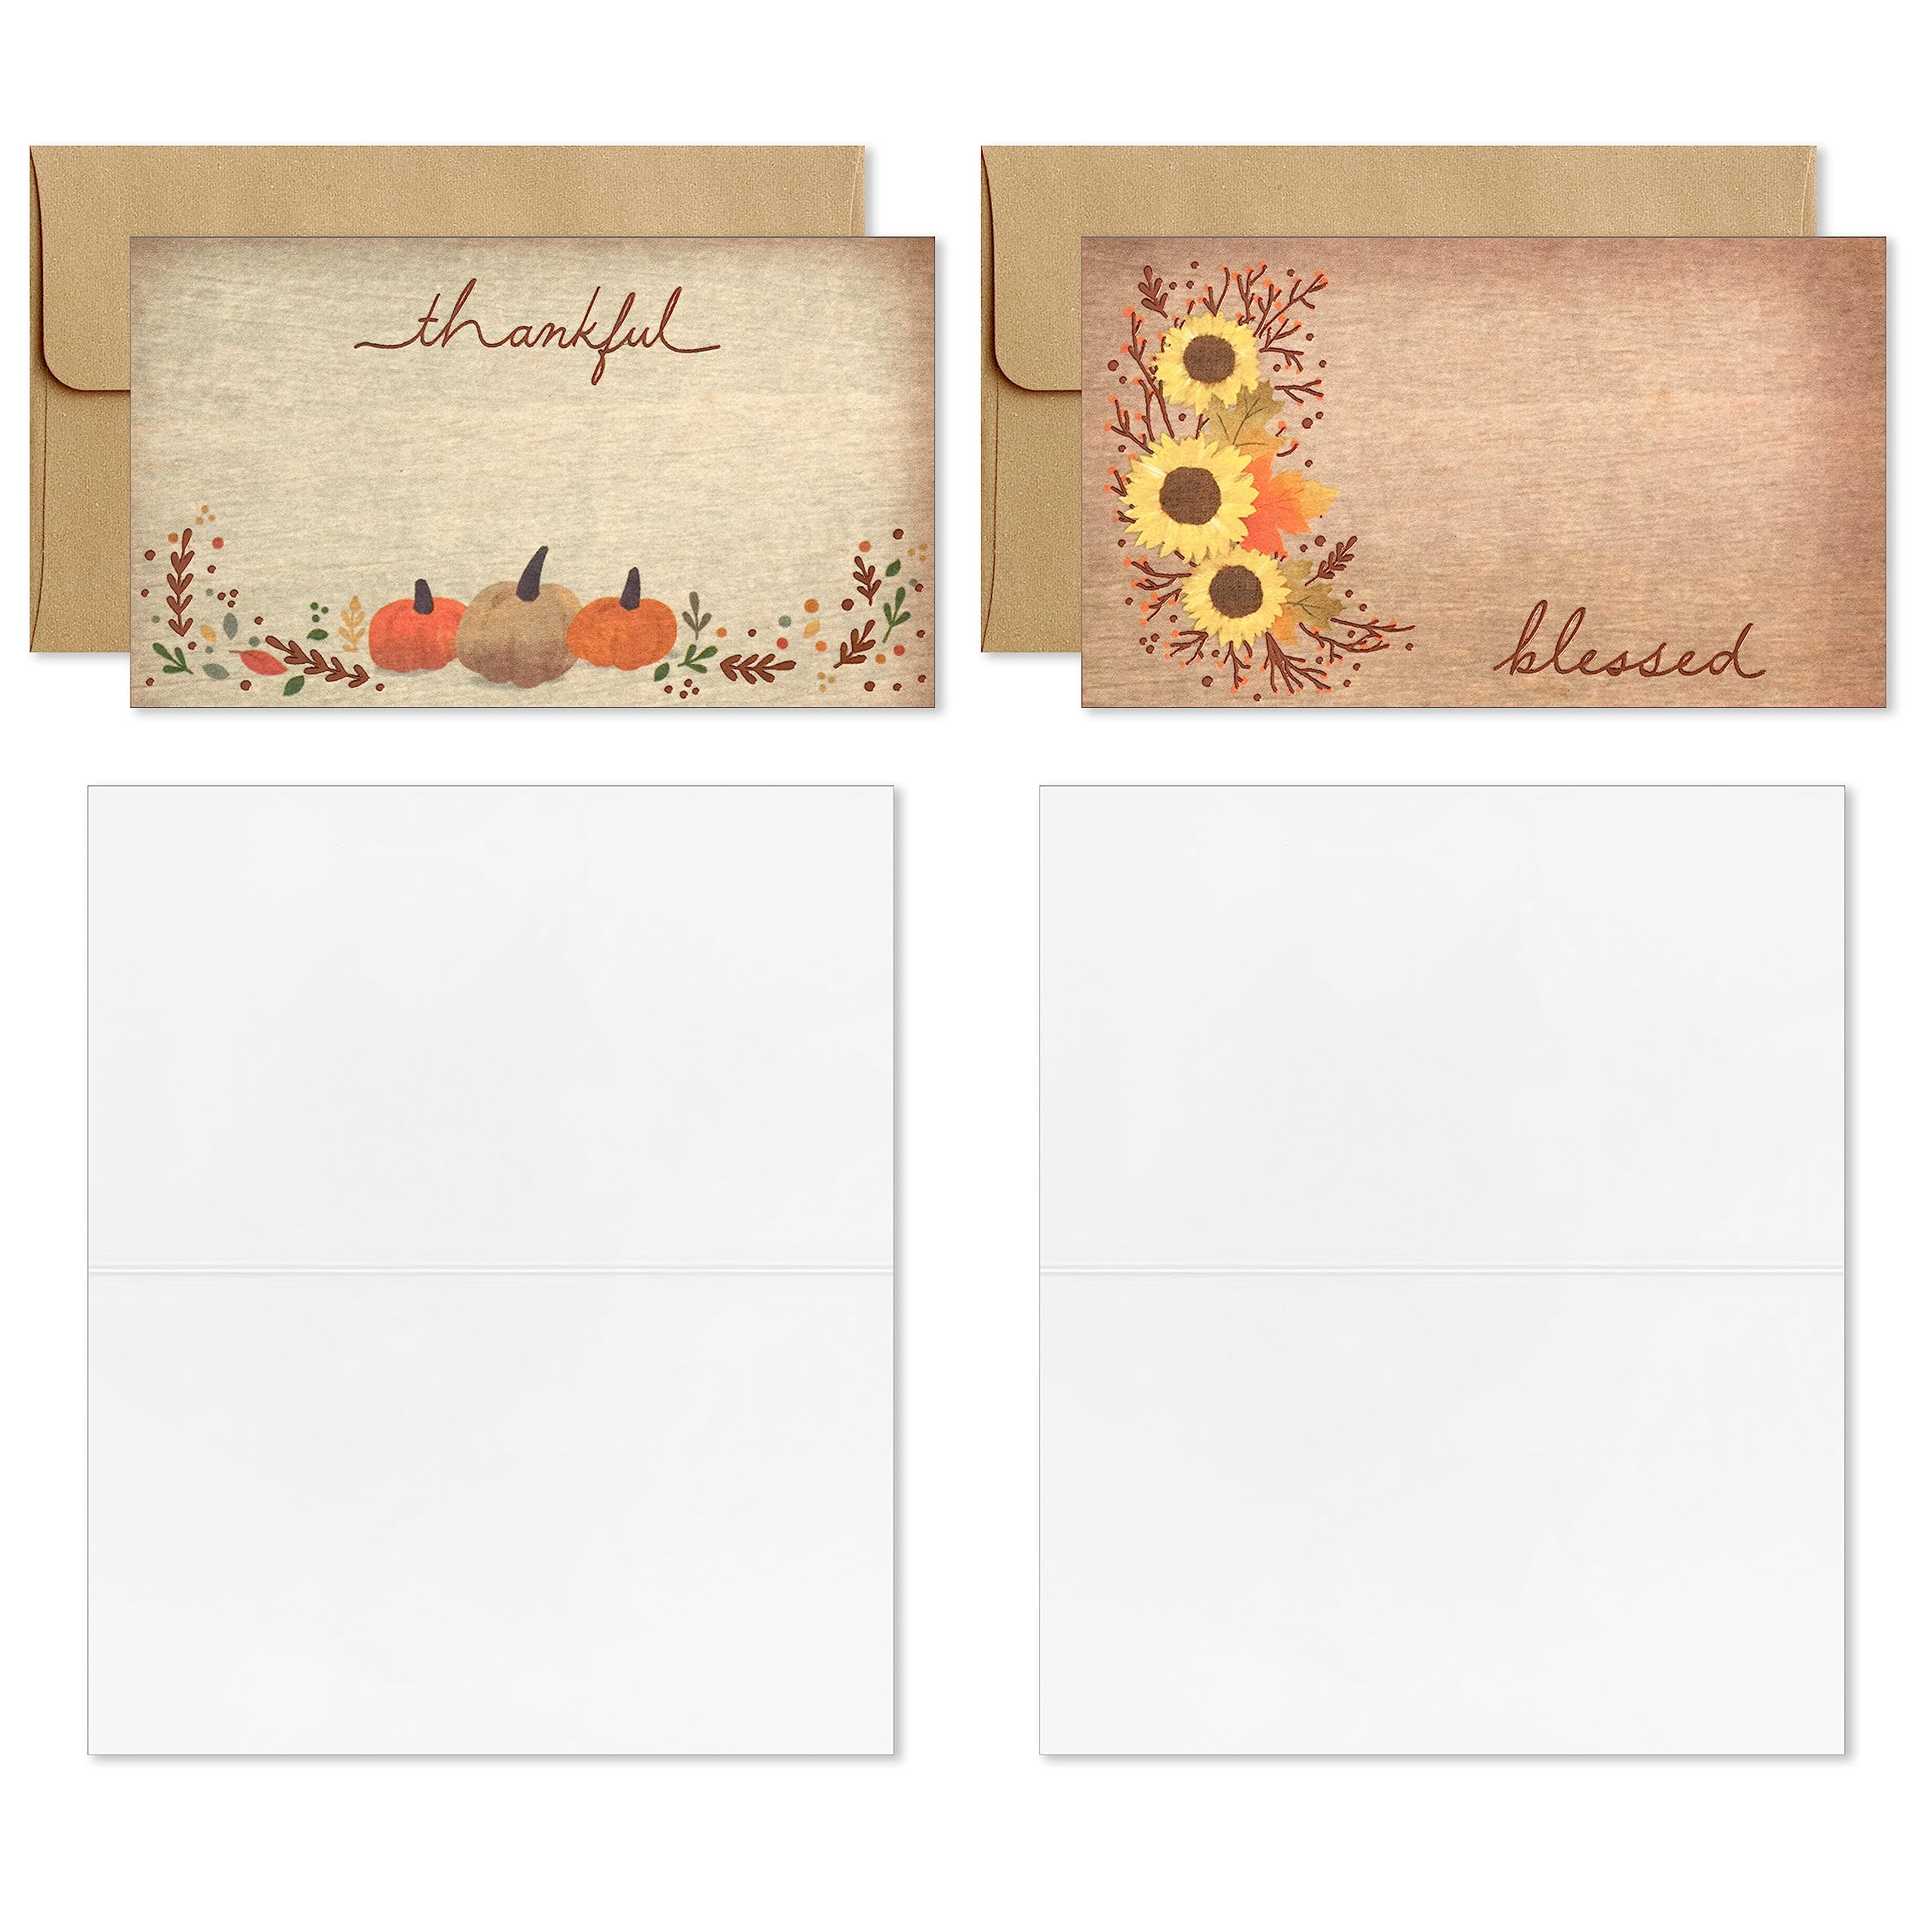 Hallmark Thanksgiving Place Cards for Table Setting (32 Mini Cards with Envelopes) Friendsgiving Party Supplies